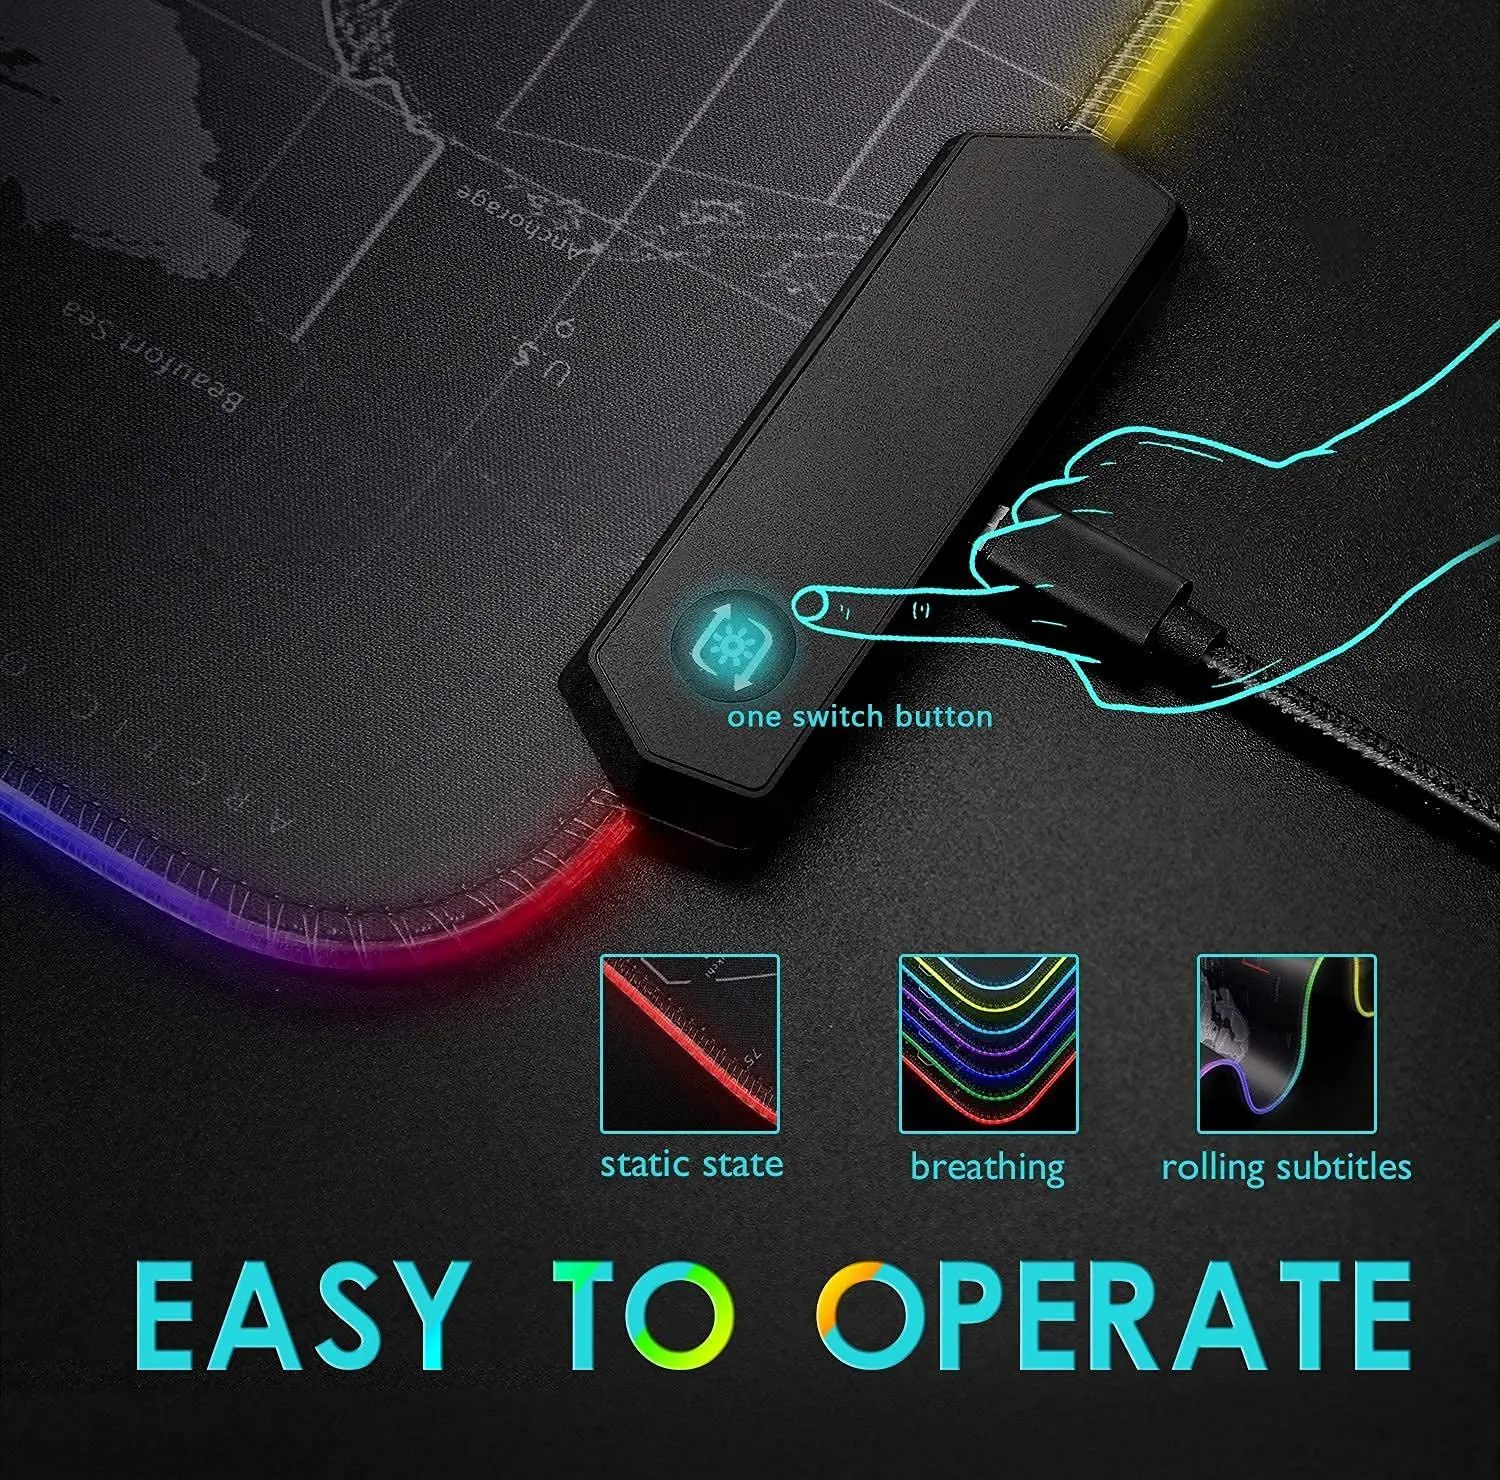 Durable XXL Fabric Surface Non Slip Extended Custom Design World Map LED RGB Gaming Mouse Pad